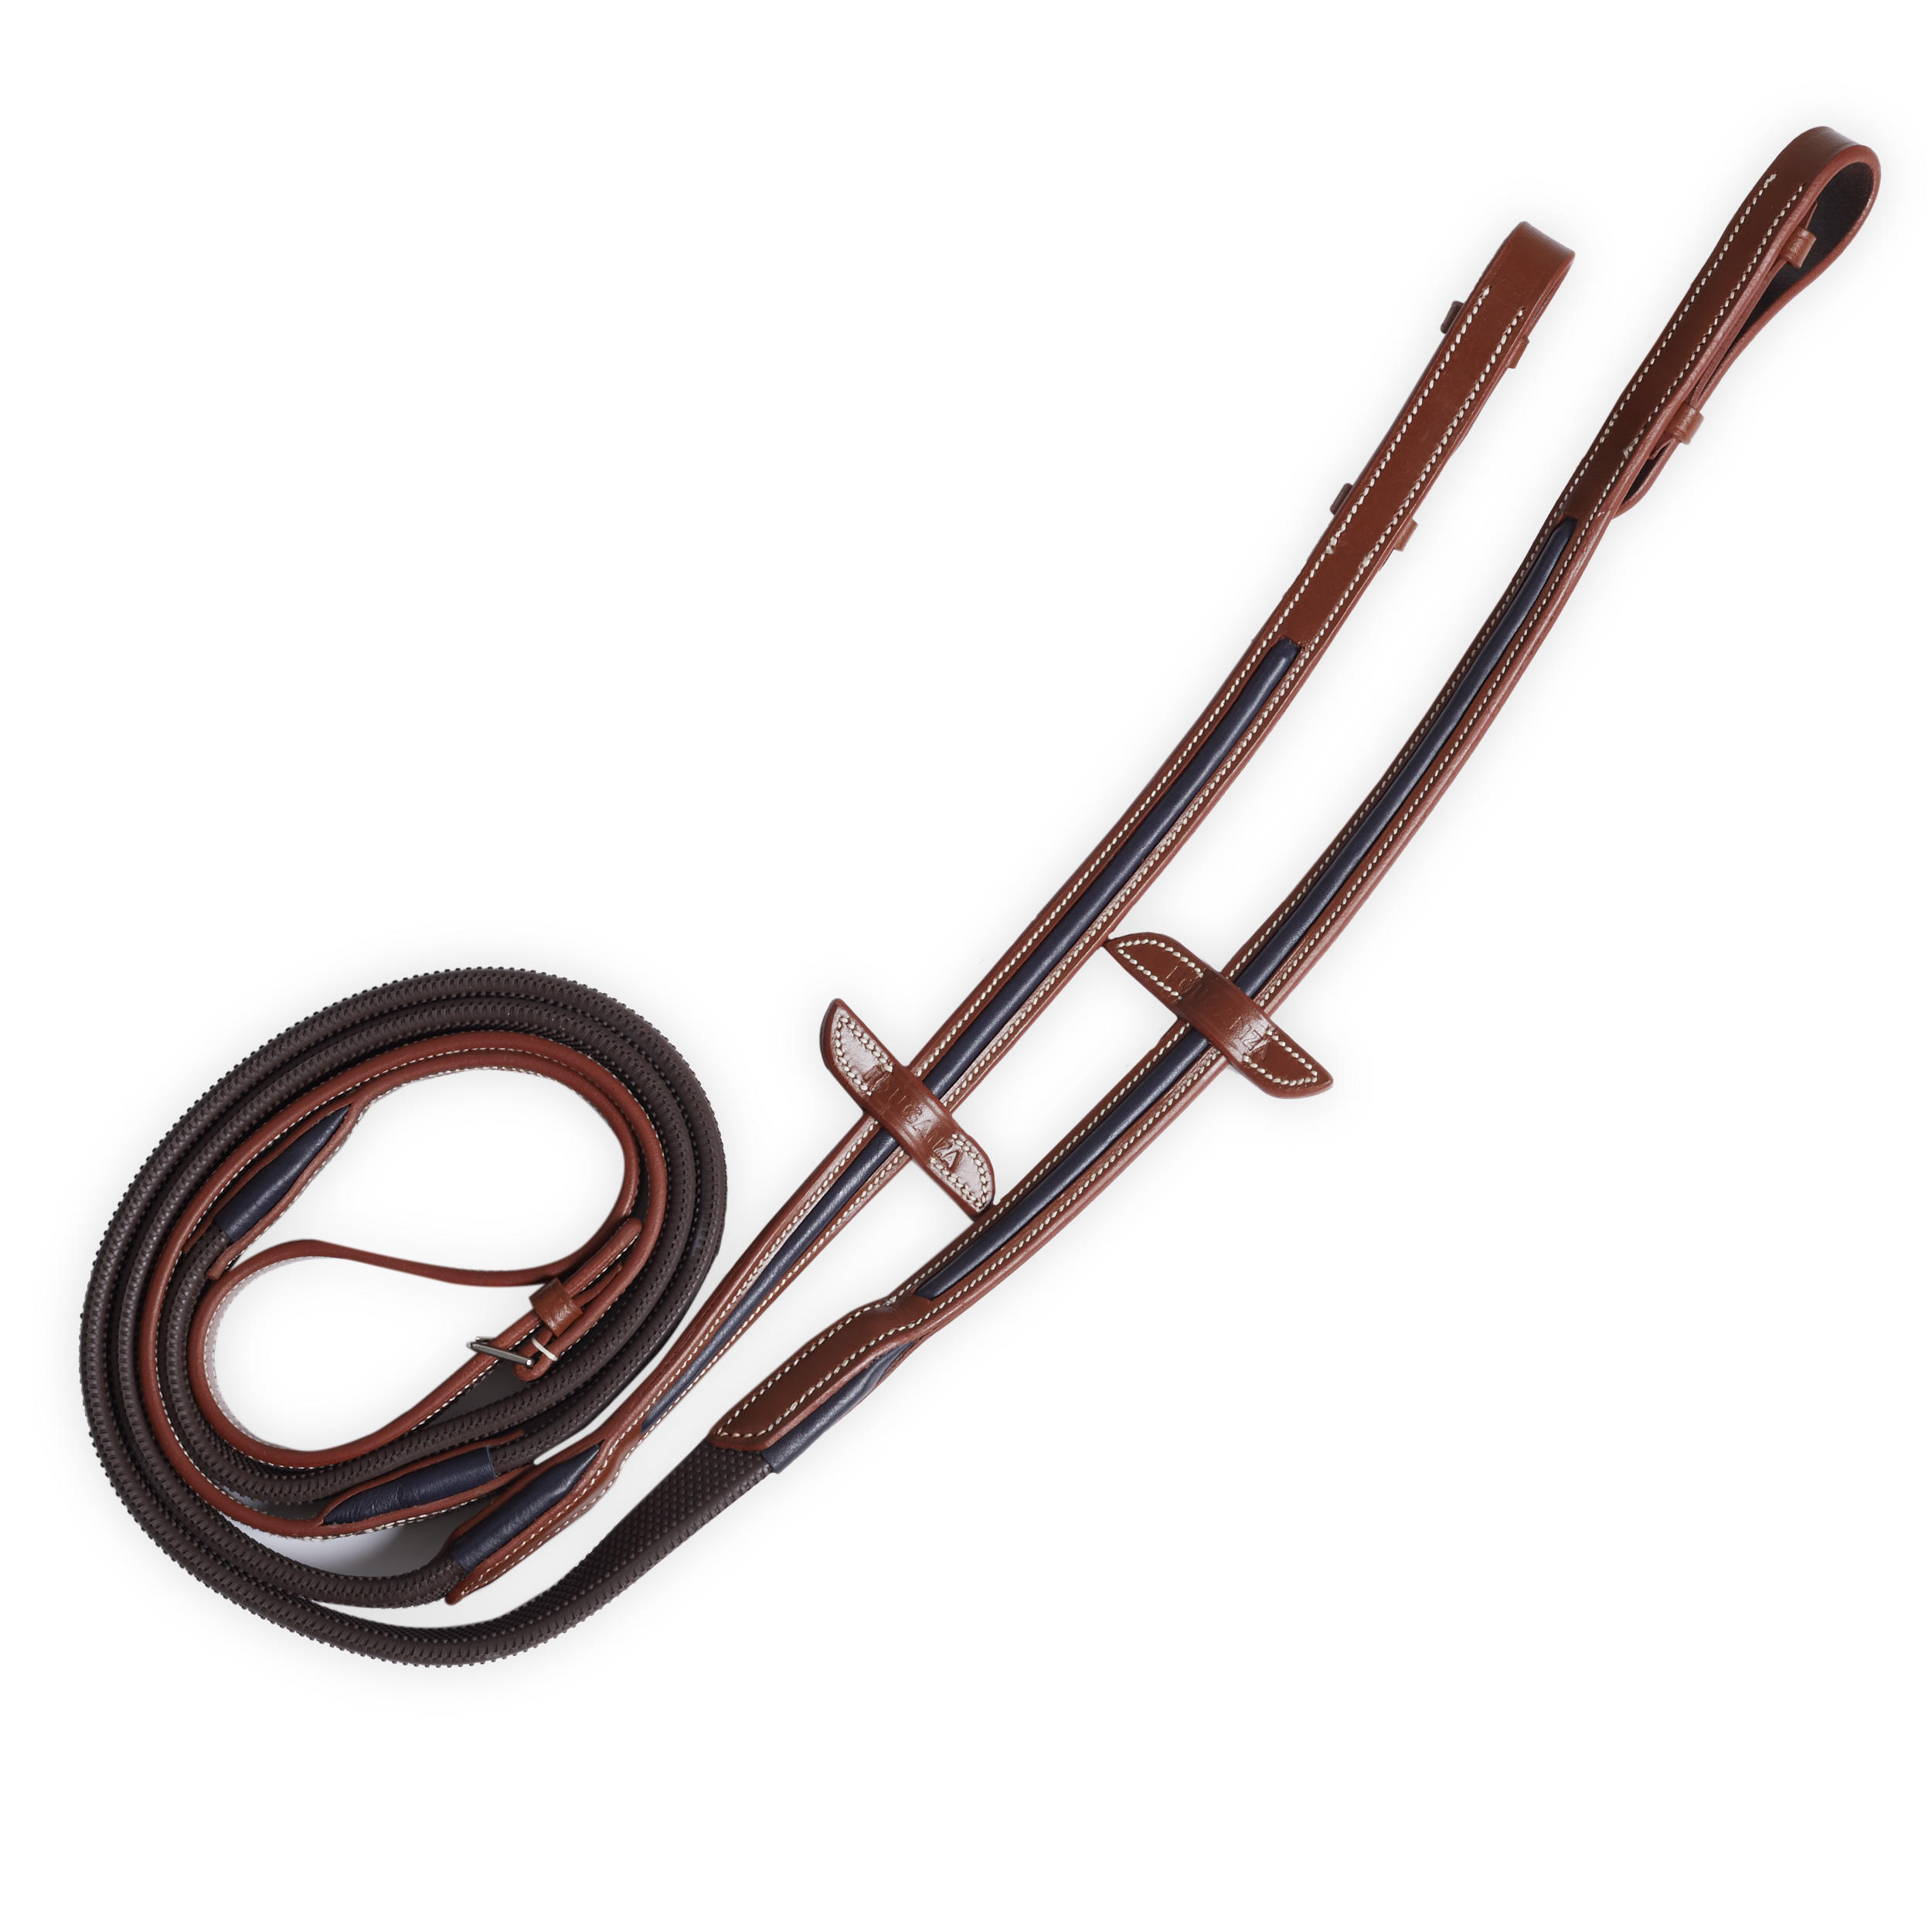 Horse and Pony Riding Leather Reins 900 Grip - Light Brown 1/4